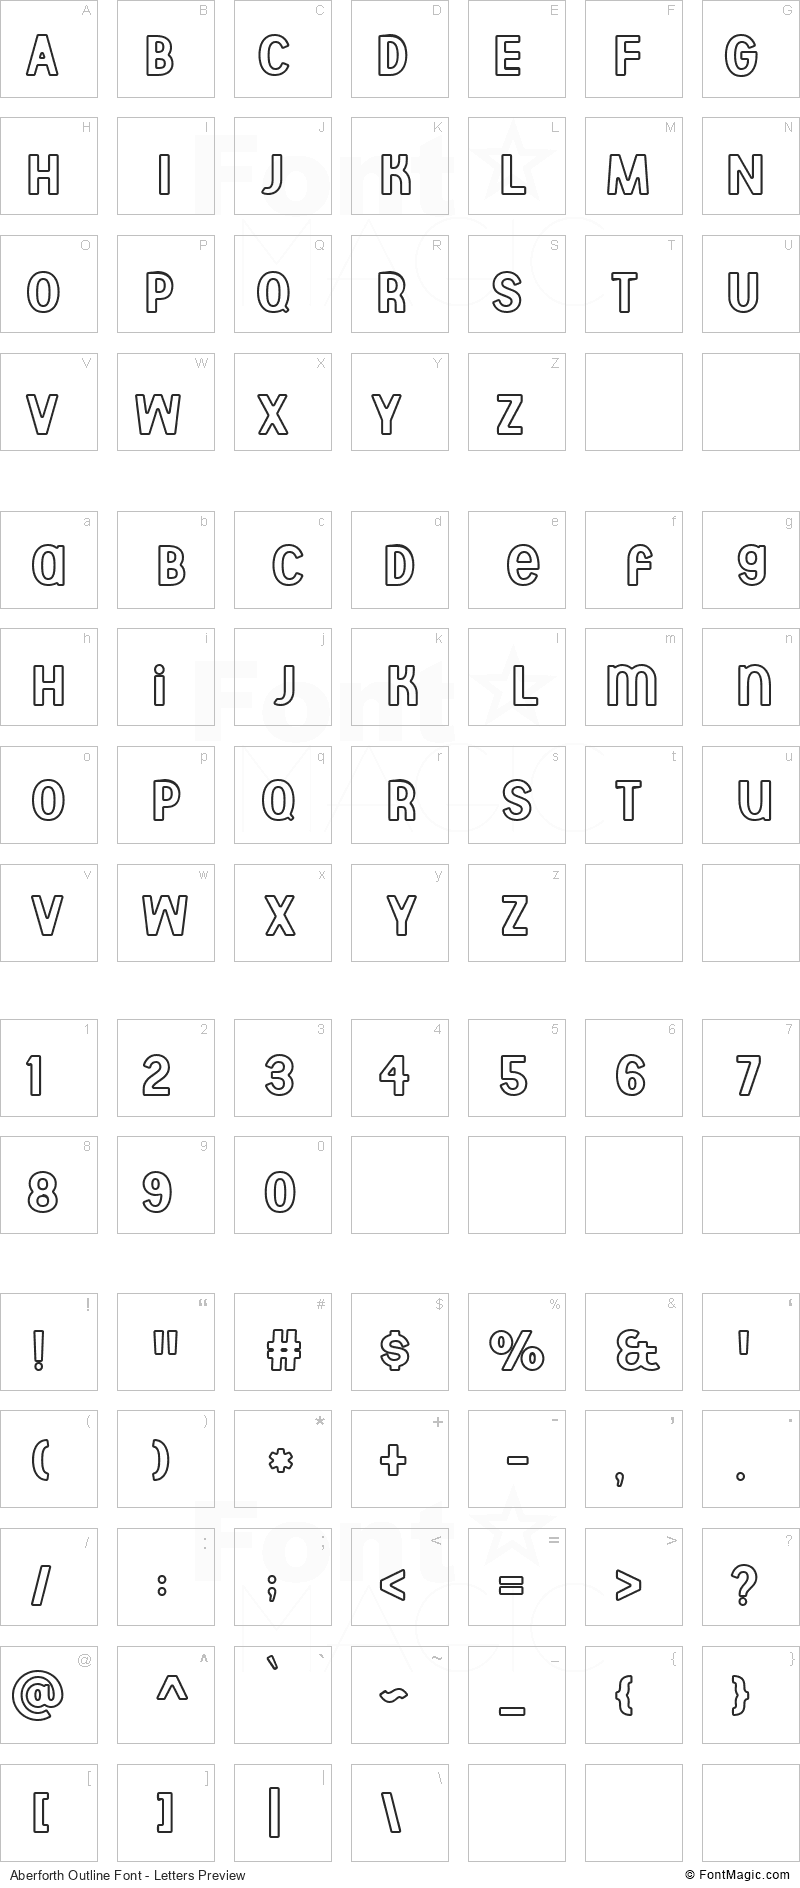 Aberforth Outline Font - All Latters Preview Chart